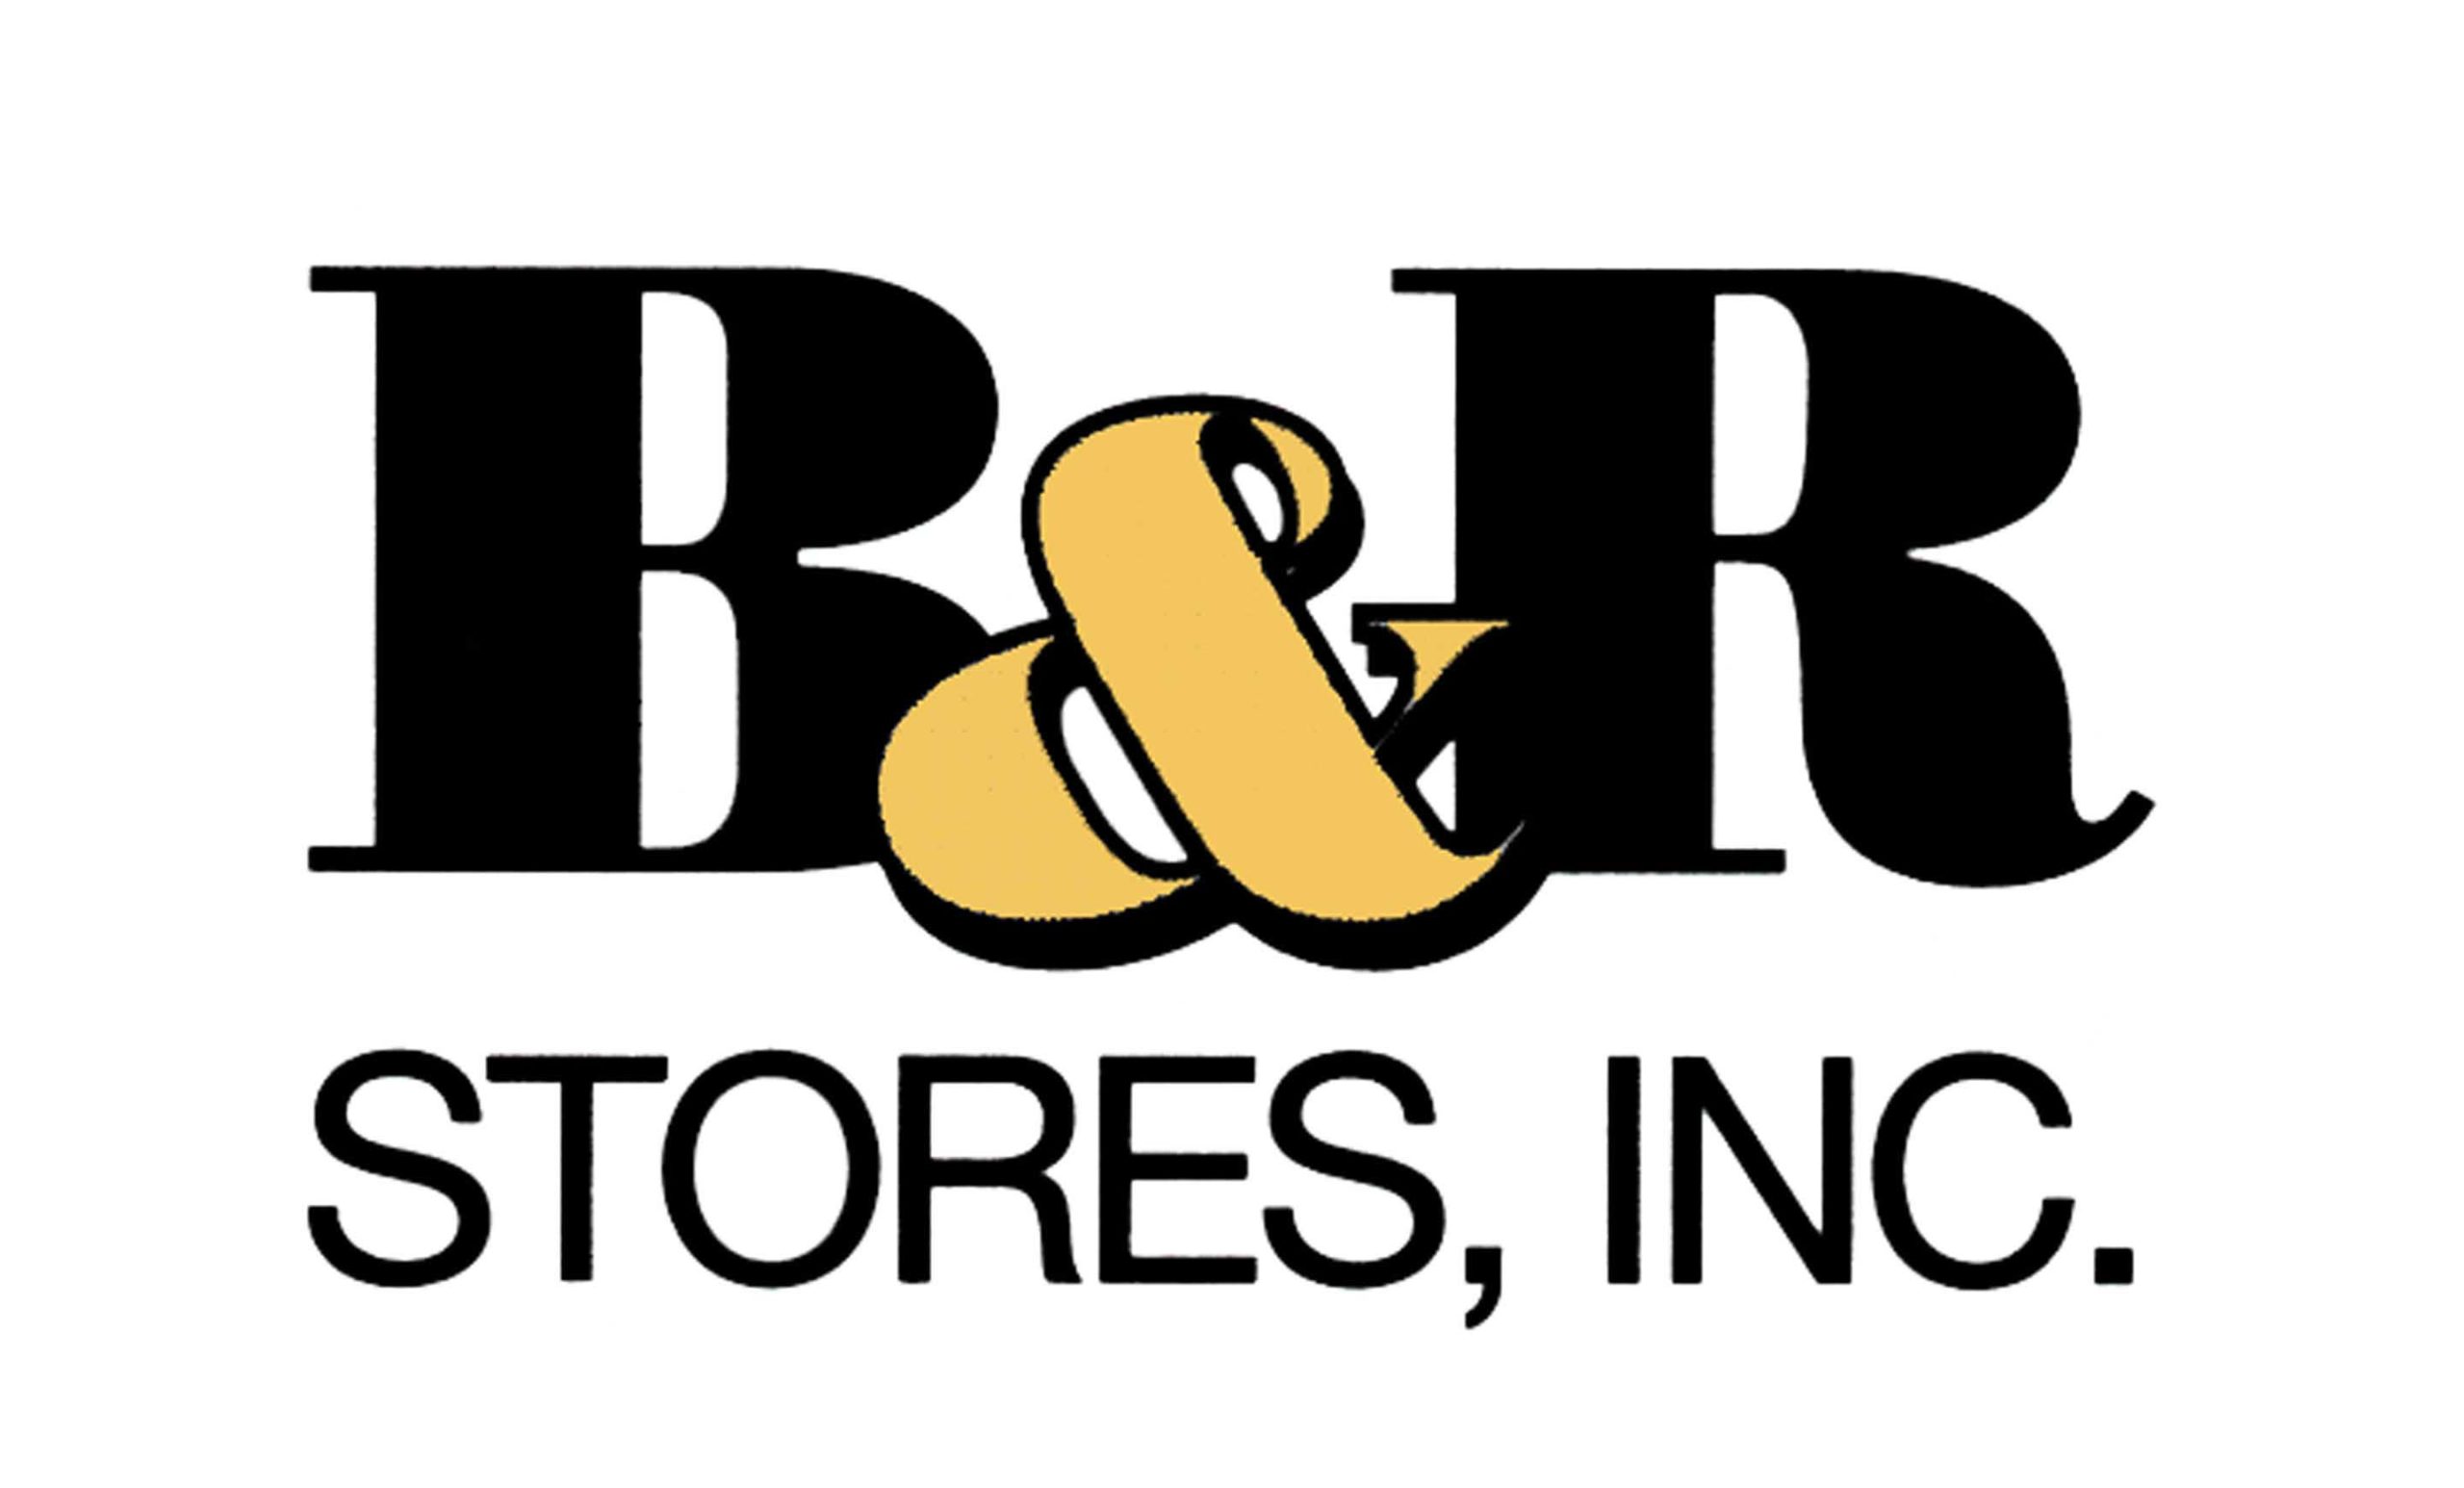 BR Stores Inc scaled